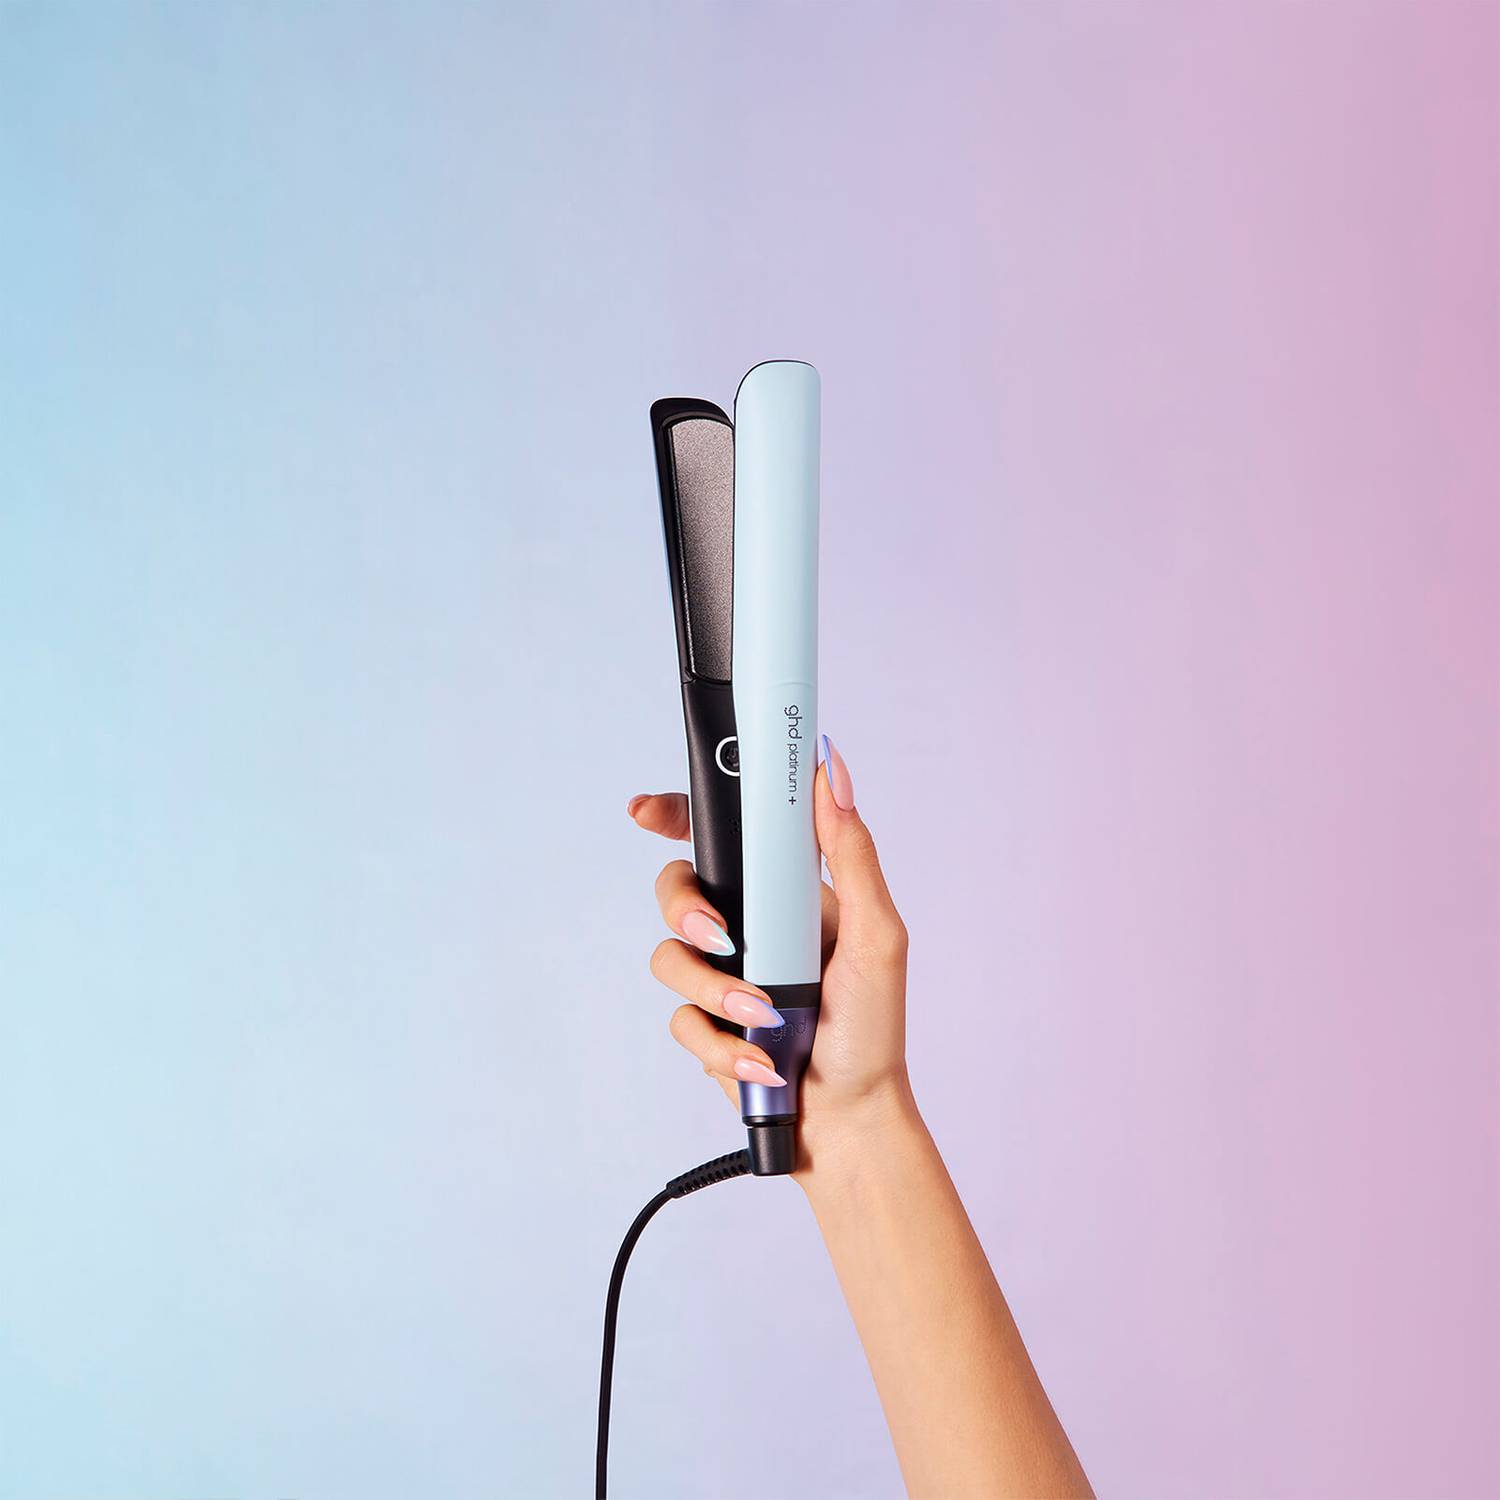 Ghd iD collection platinum + straighteners in pastel blue